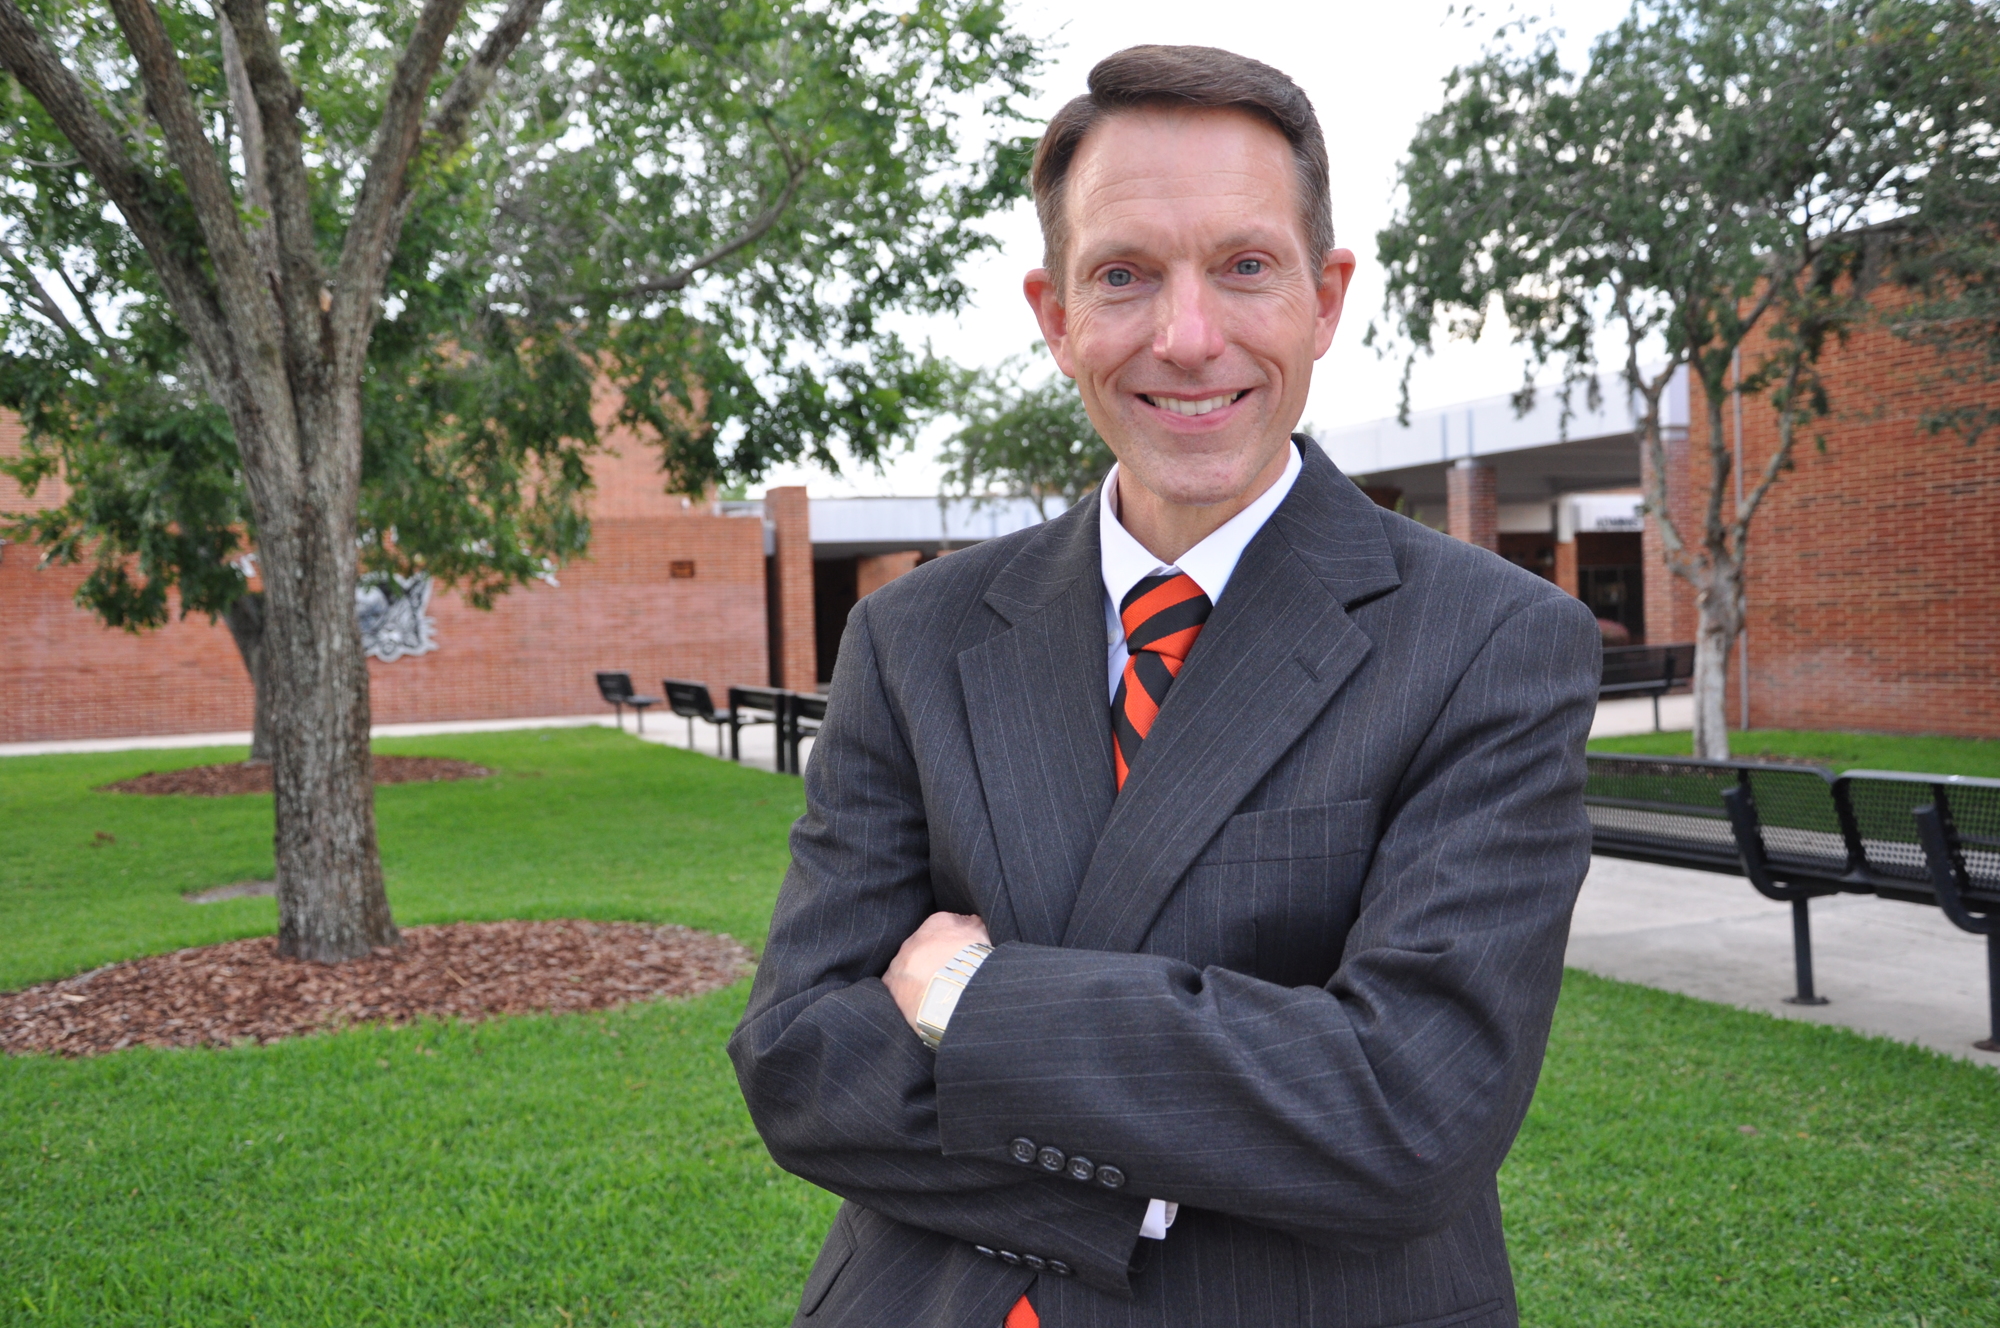 Longtime Winter Park High School principal Tim Smith may be leaving, but Smith said the school will always hold a place in his heart.